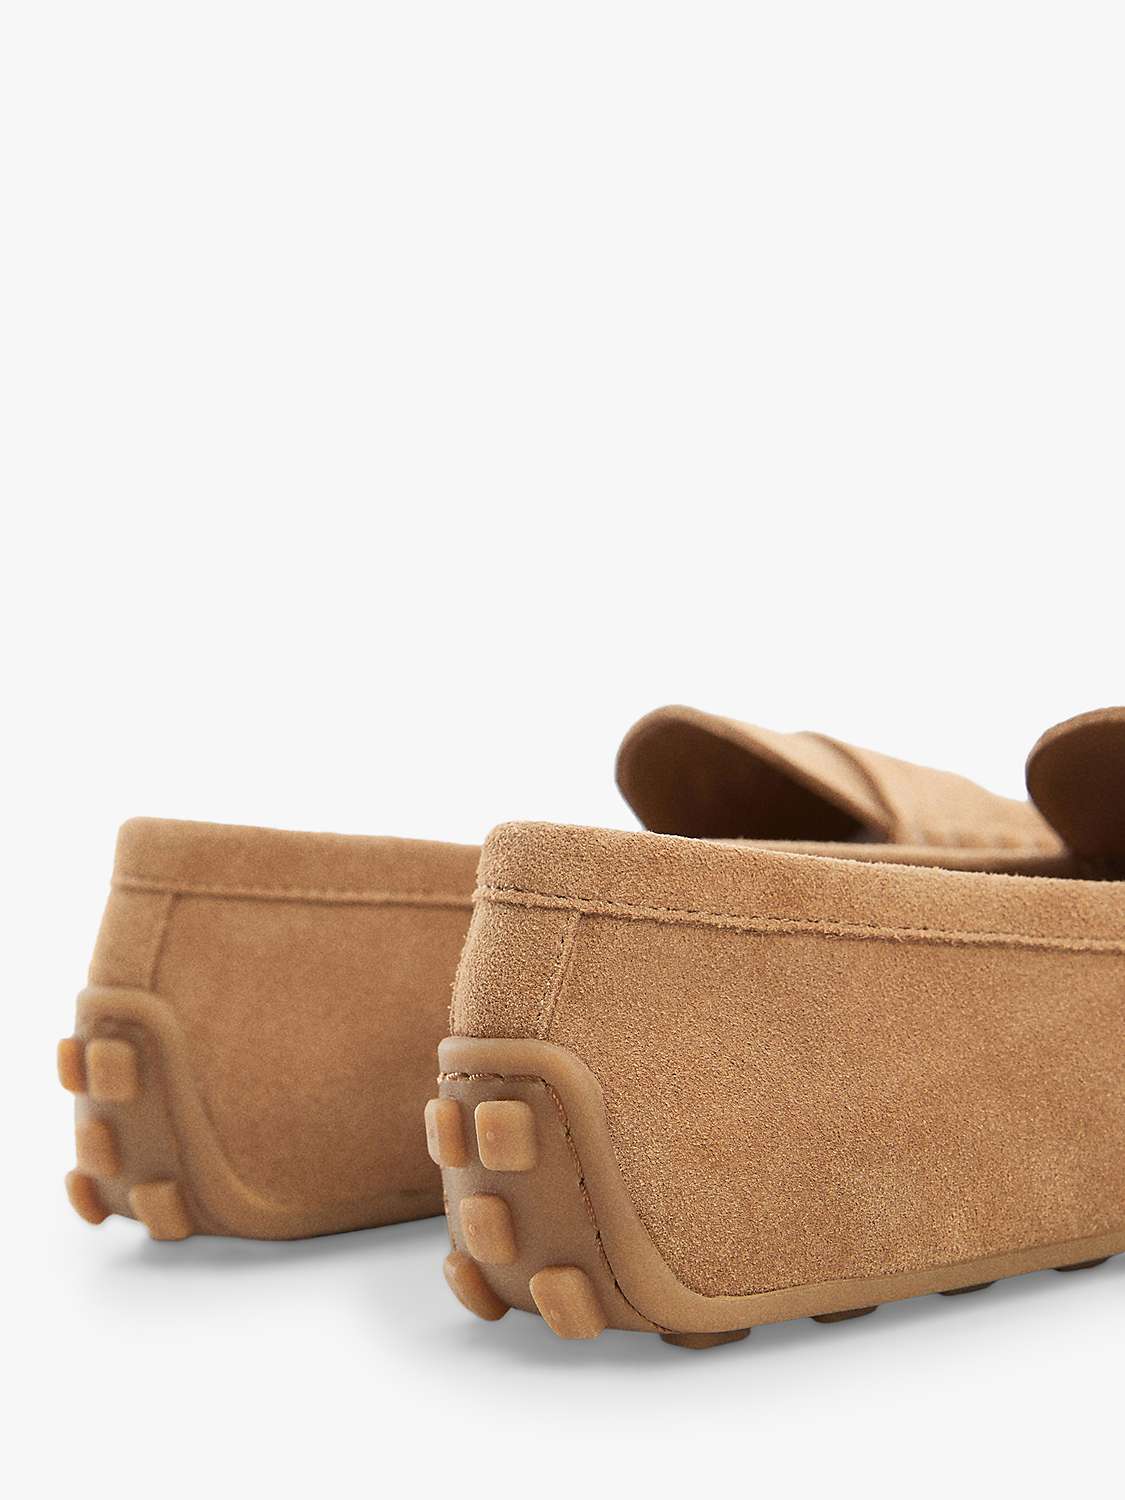 Buy Mango Rub Suede Round Toe Loafers, Brown Online at johnlewis.com